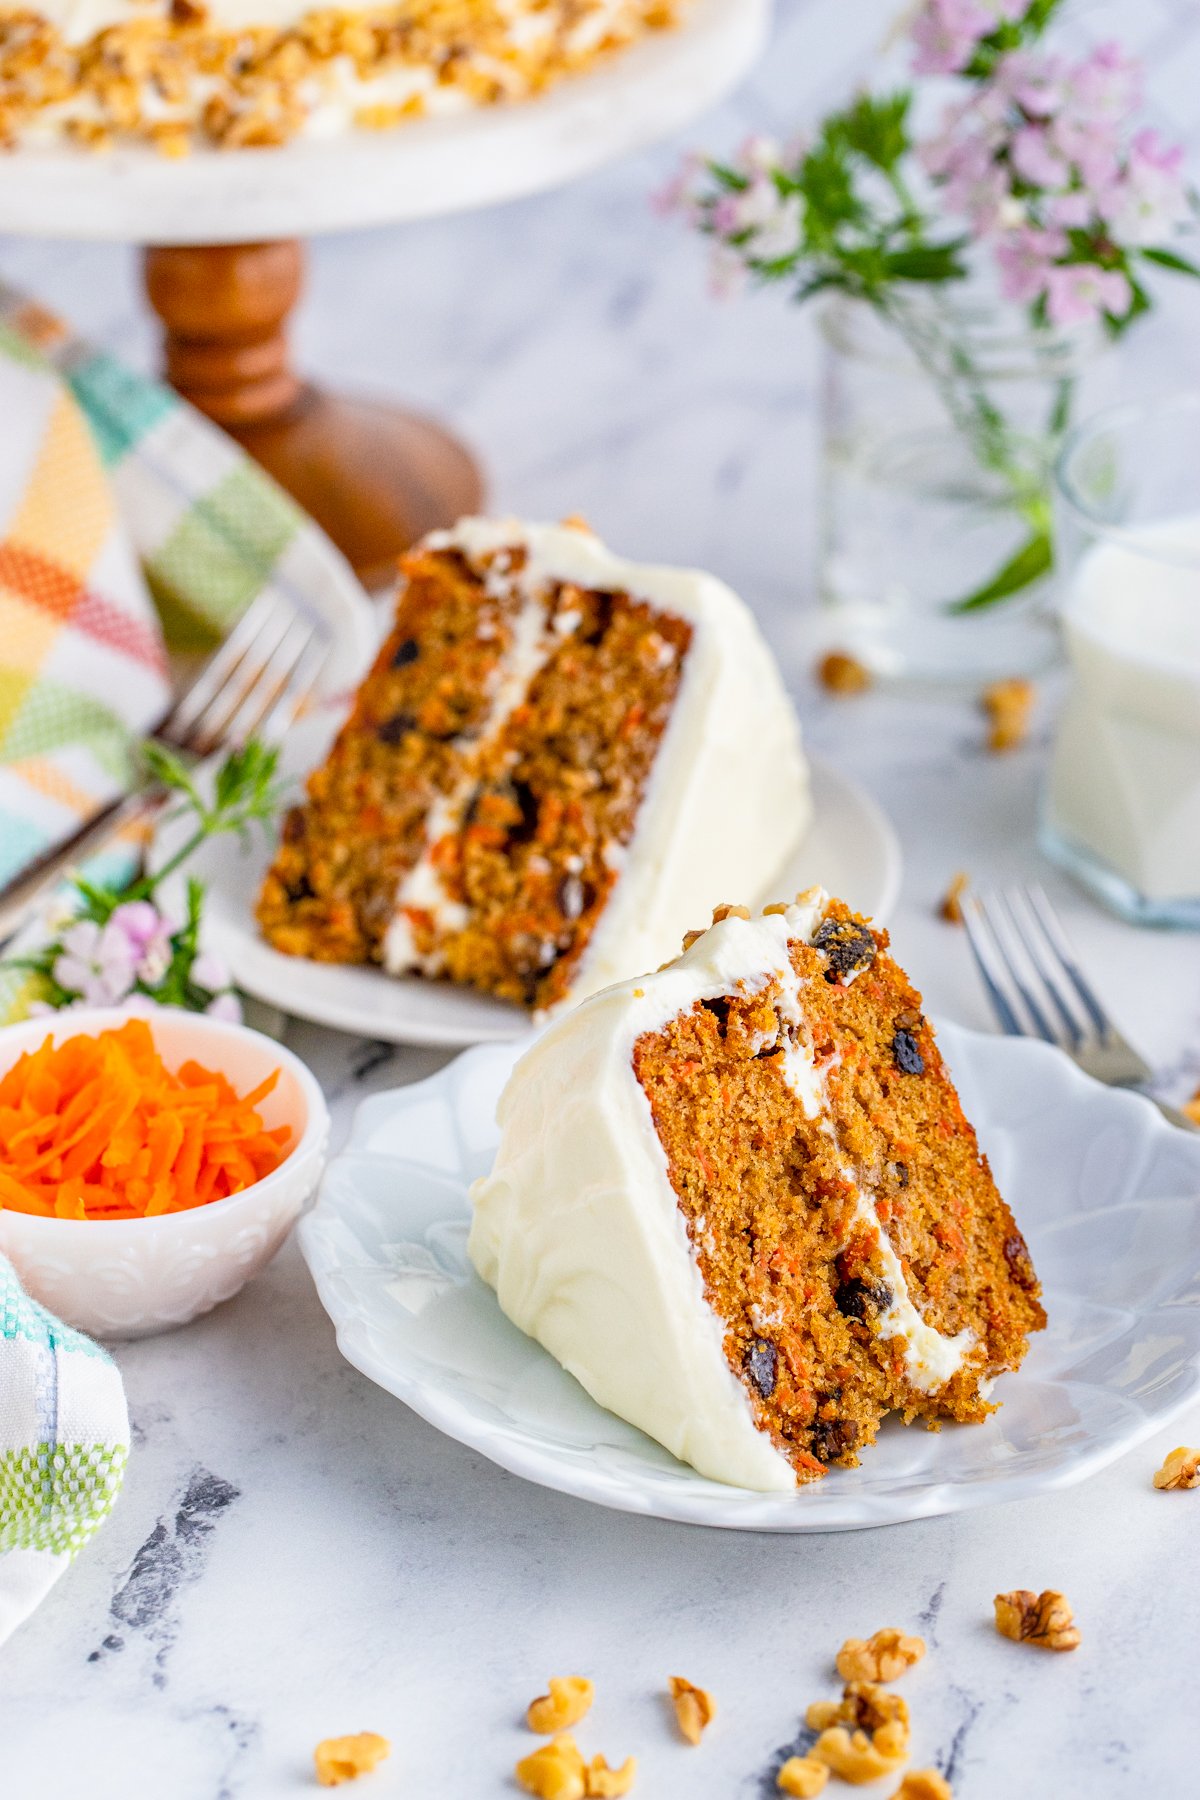 Two slices of Carrot Cake on white plates